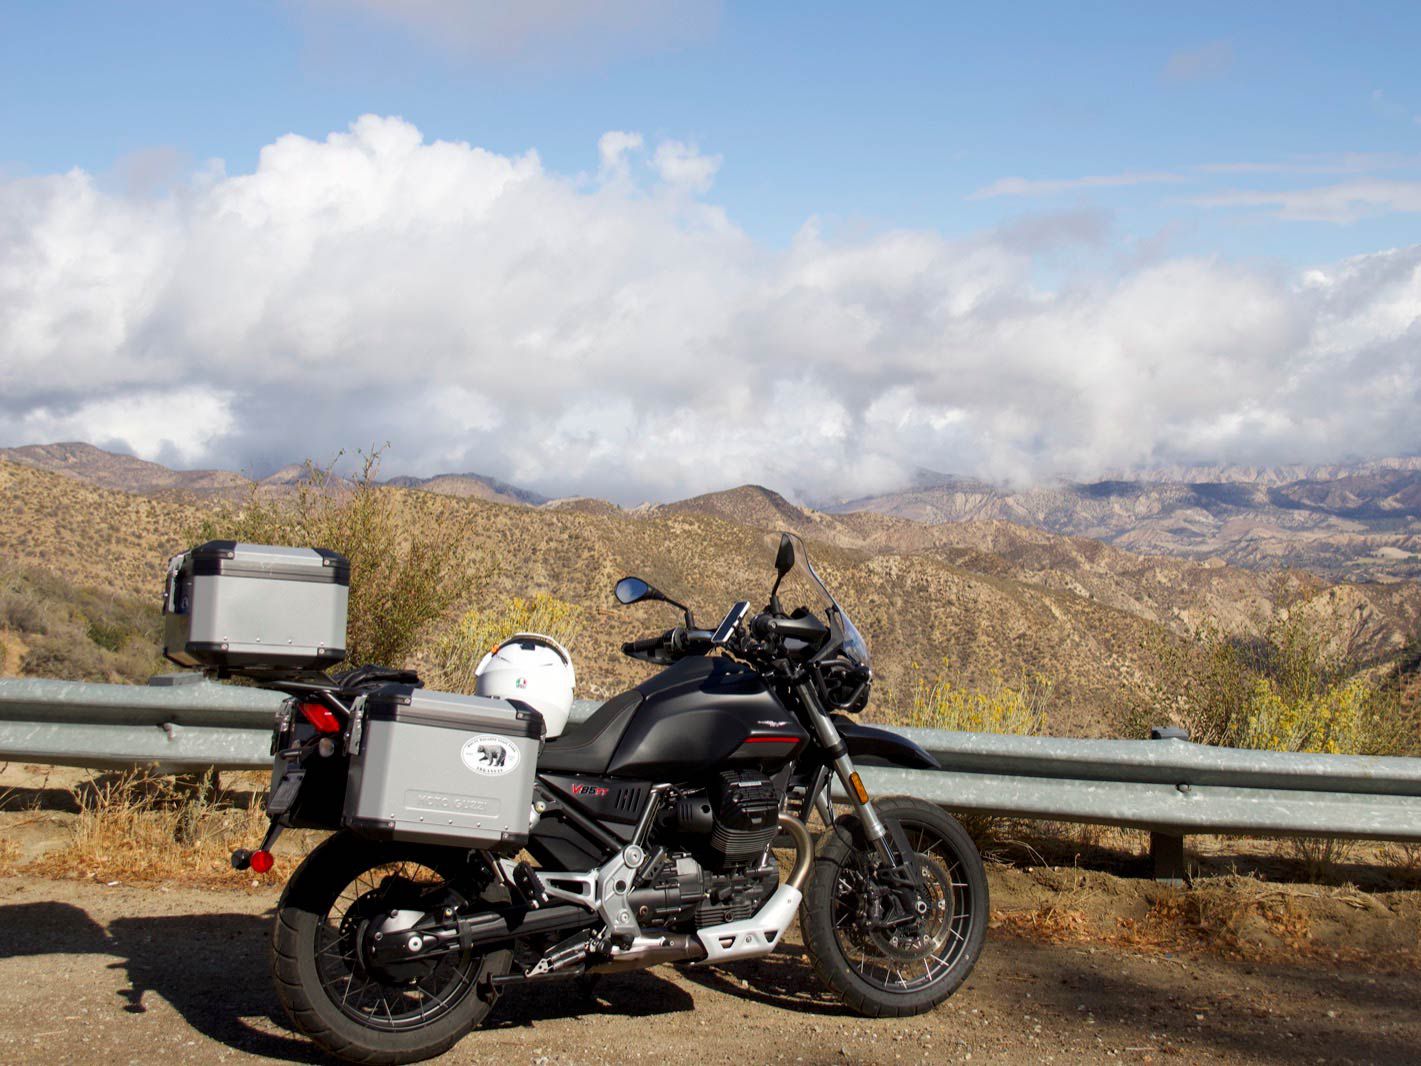 The V85 TT is set to provide comfort during the 2022 Moto Guzzi Experience trips.